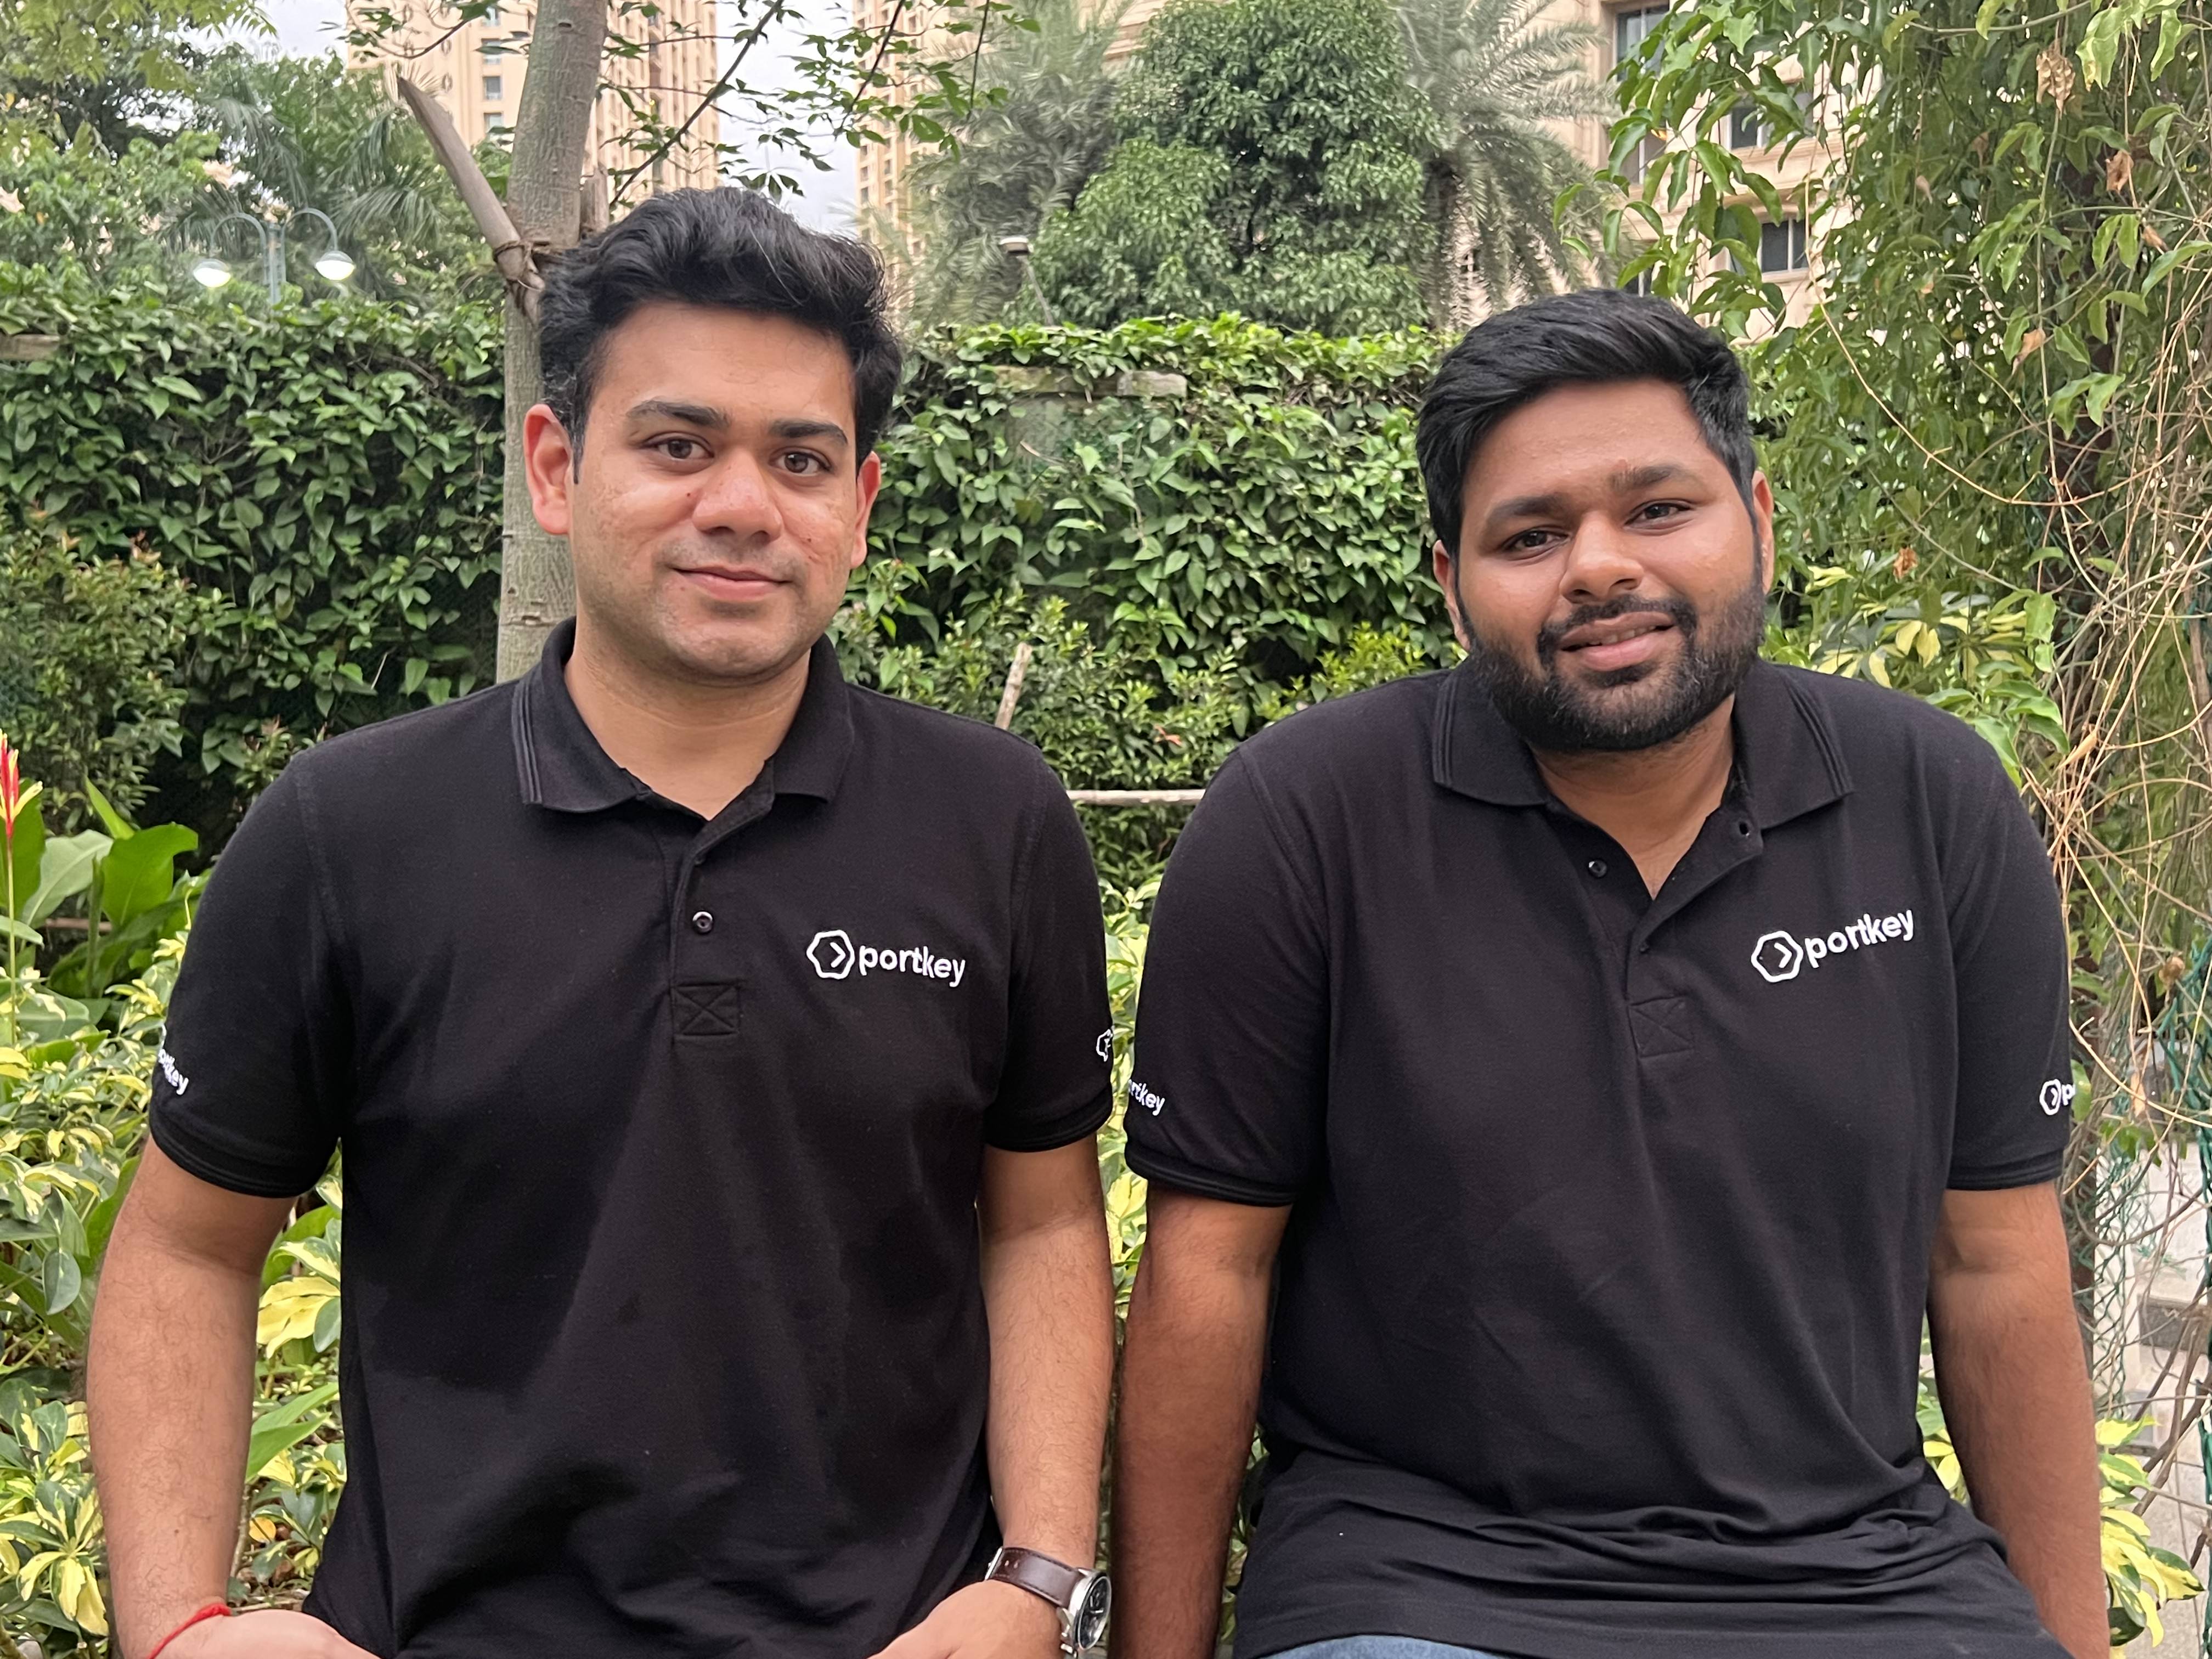 Portkey.ai founders: (L to R) Rohit Agarwal and Ayush Garg